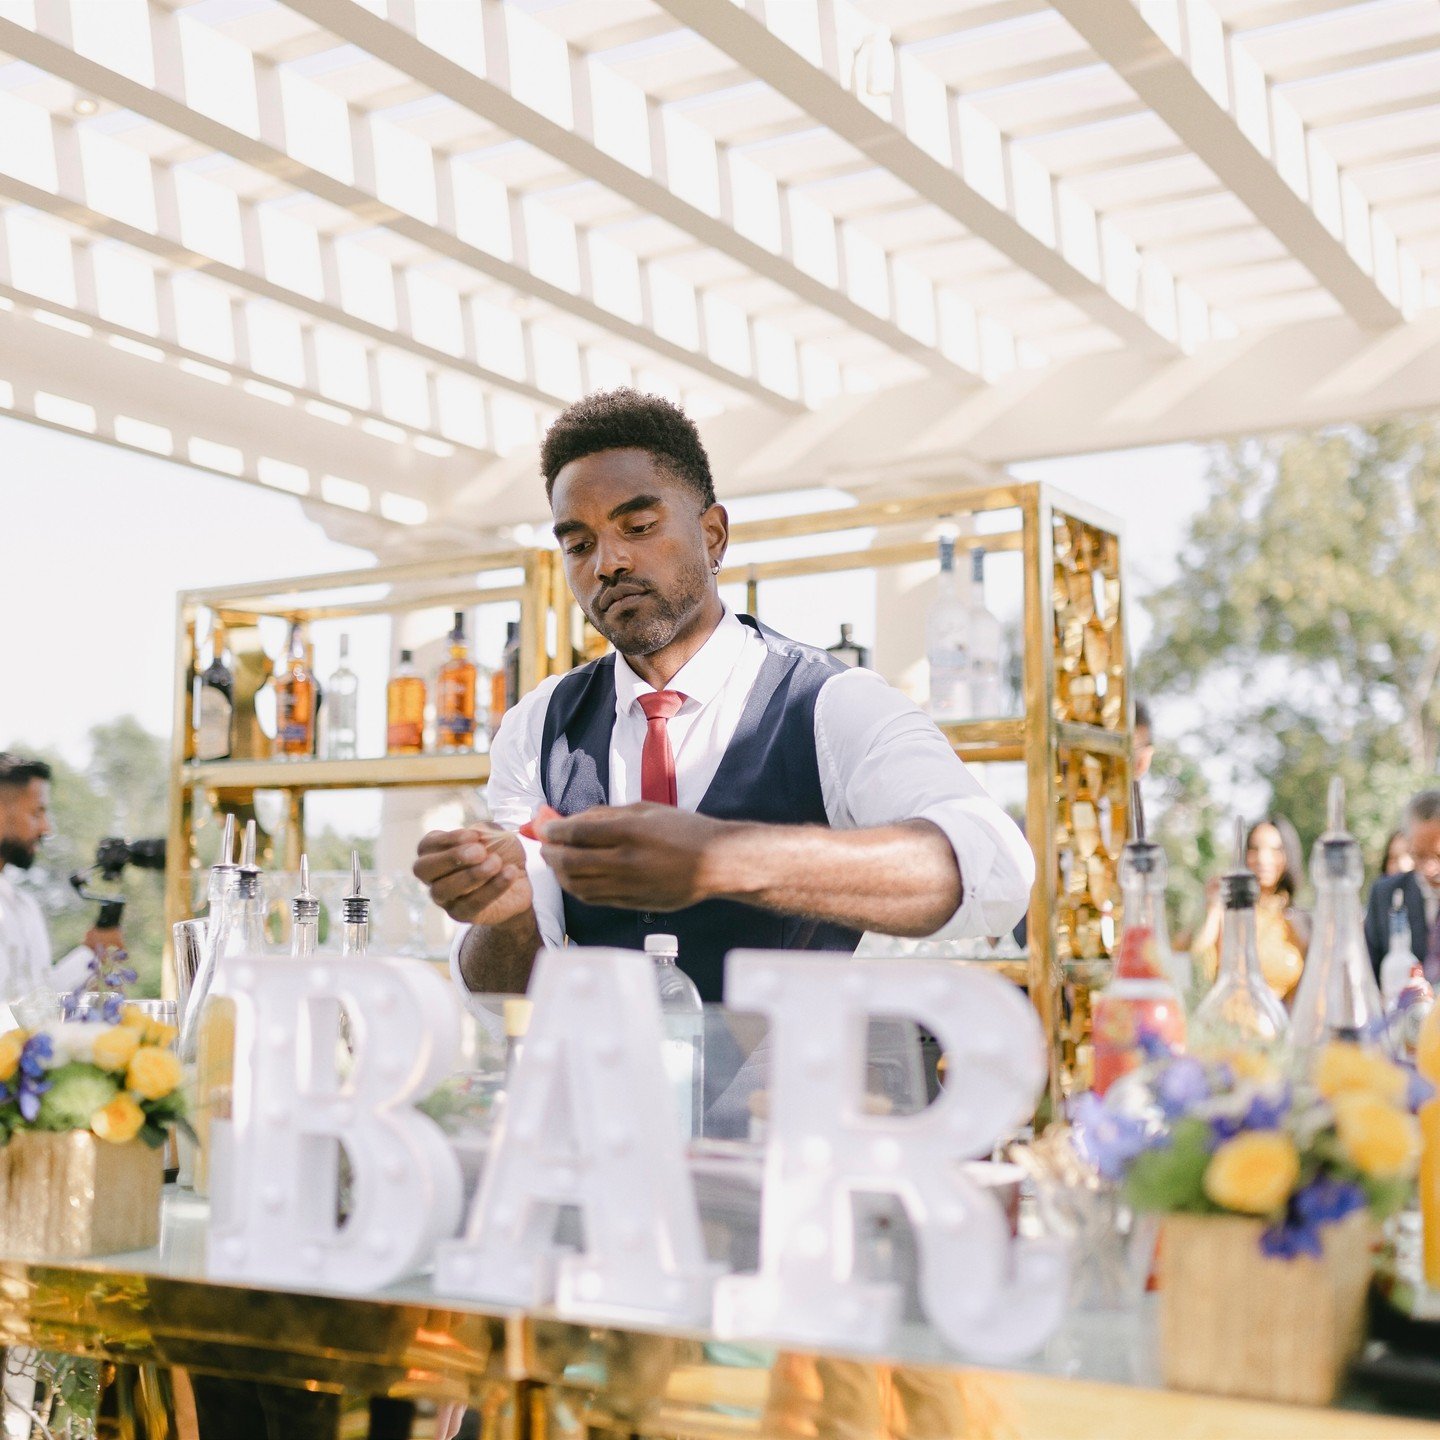 The Bar is the centerpiece of your party! Make it gorgeous and make it a hot spot. The key to a great party - Make sure you have plenty of bartenders to keep the fun flowing. I like to staff one bartender per 50 guests. There is no fun when you are i